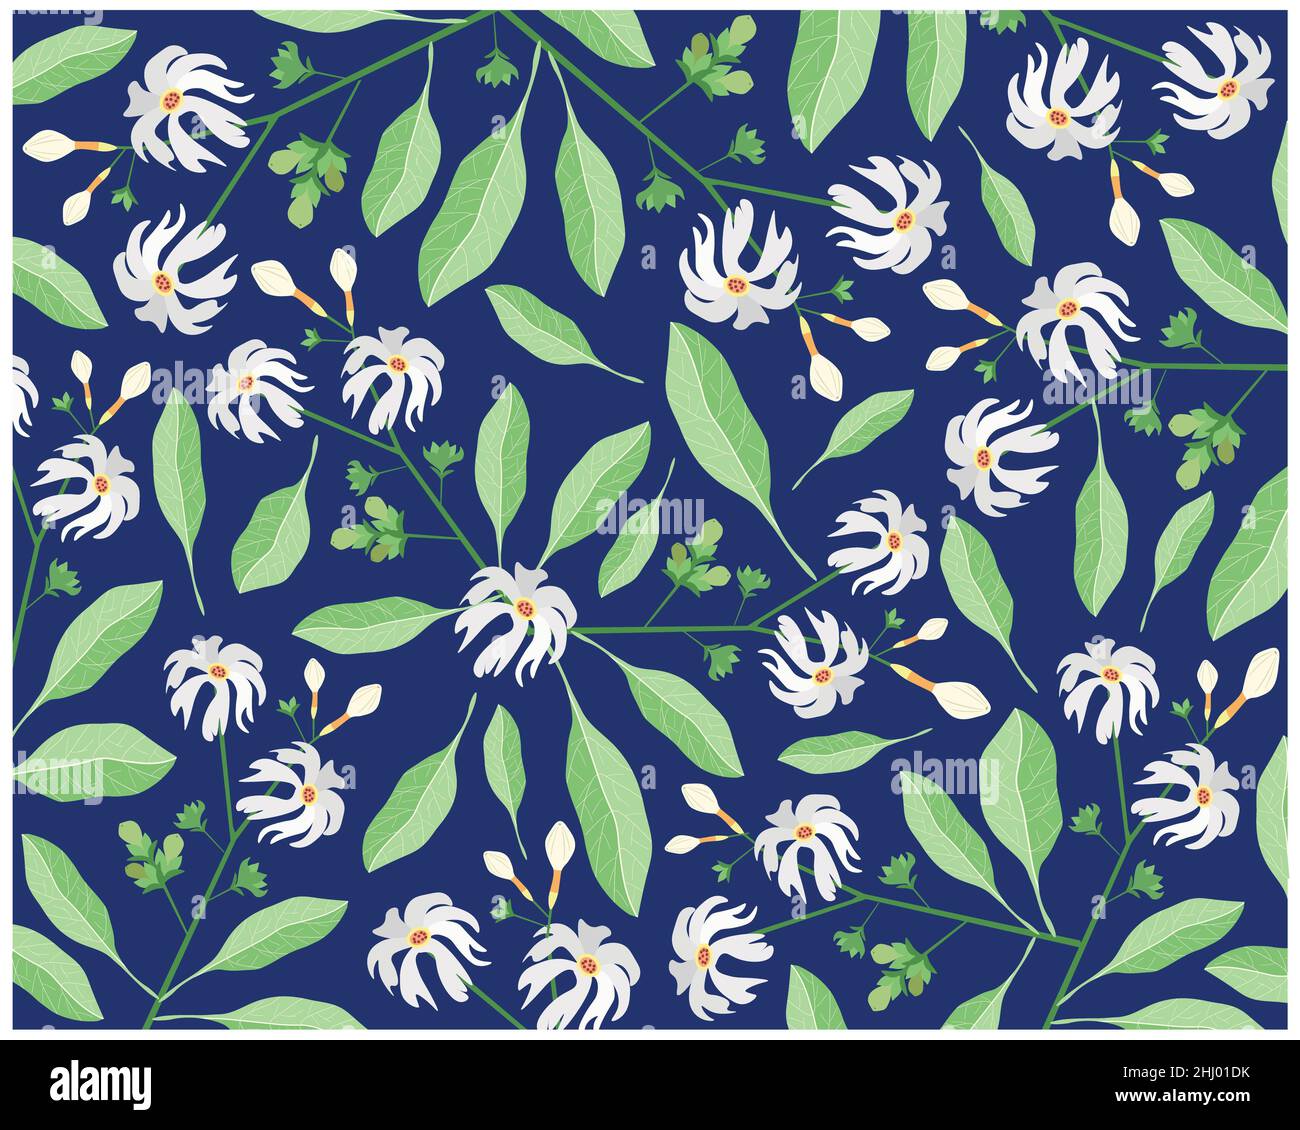 Beautiful Flower, Illustration Background of Nyctanthes Arbor-tristis or Night Flowering Jasmine with Green Leaves. Stock Photo